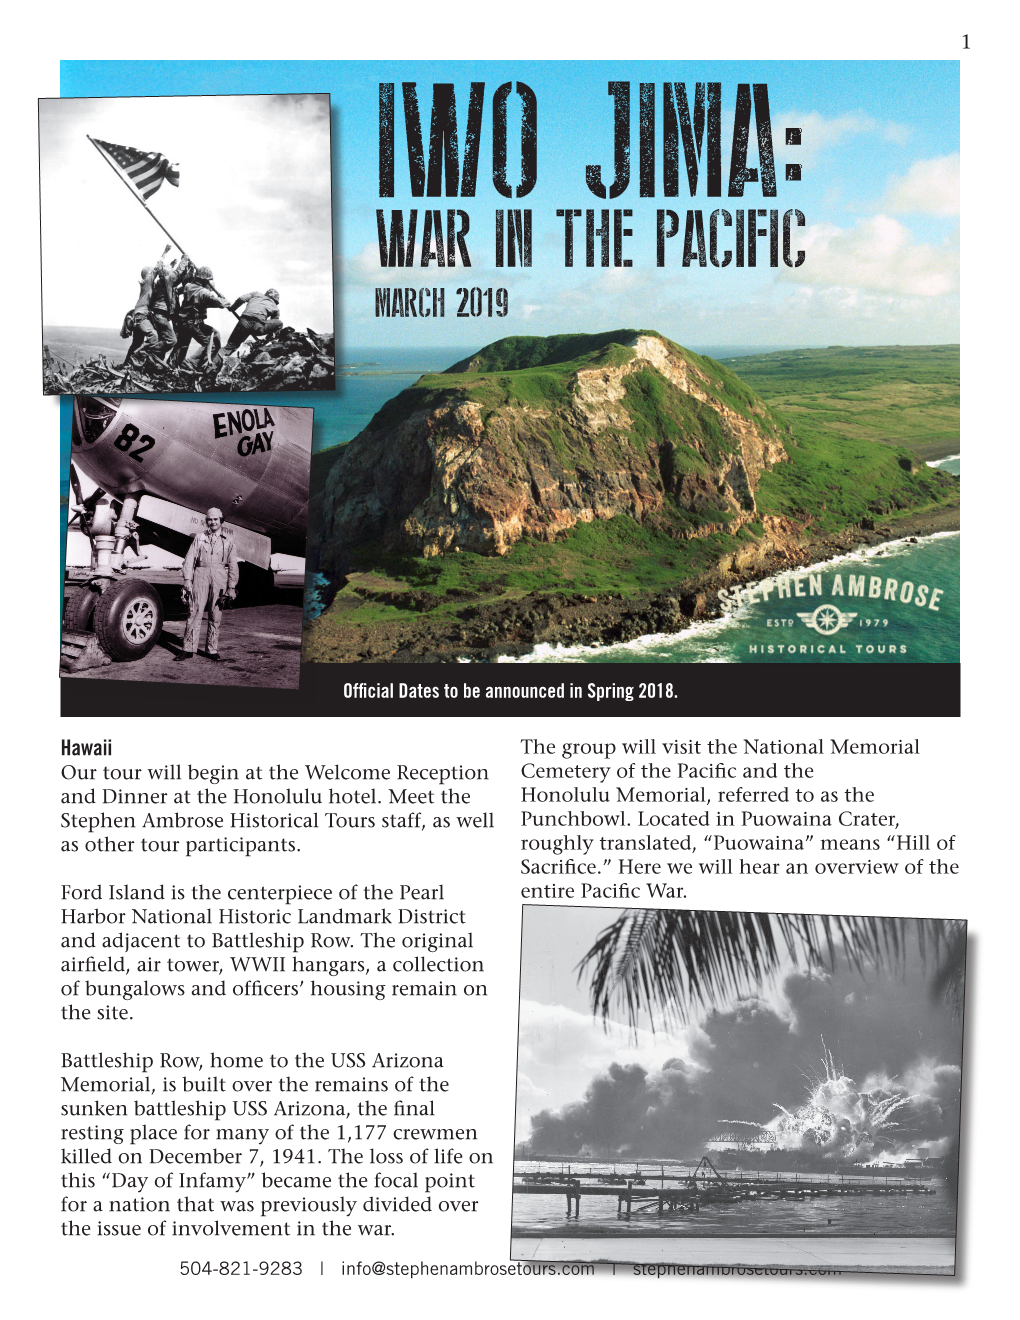 War in the Pacific Tour WAR in the PACIFIC MARCH 2019